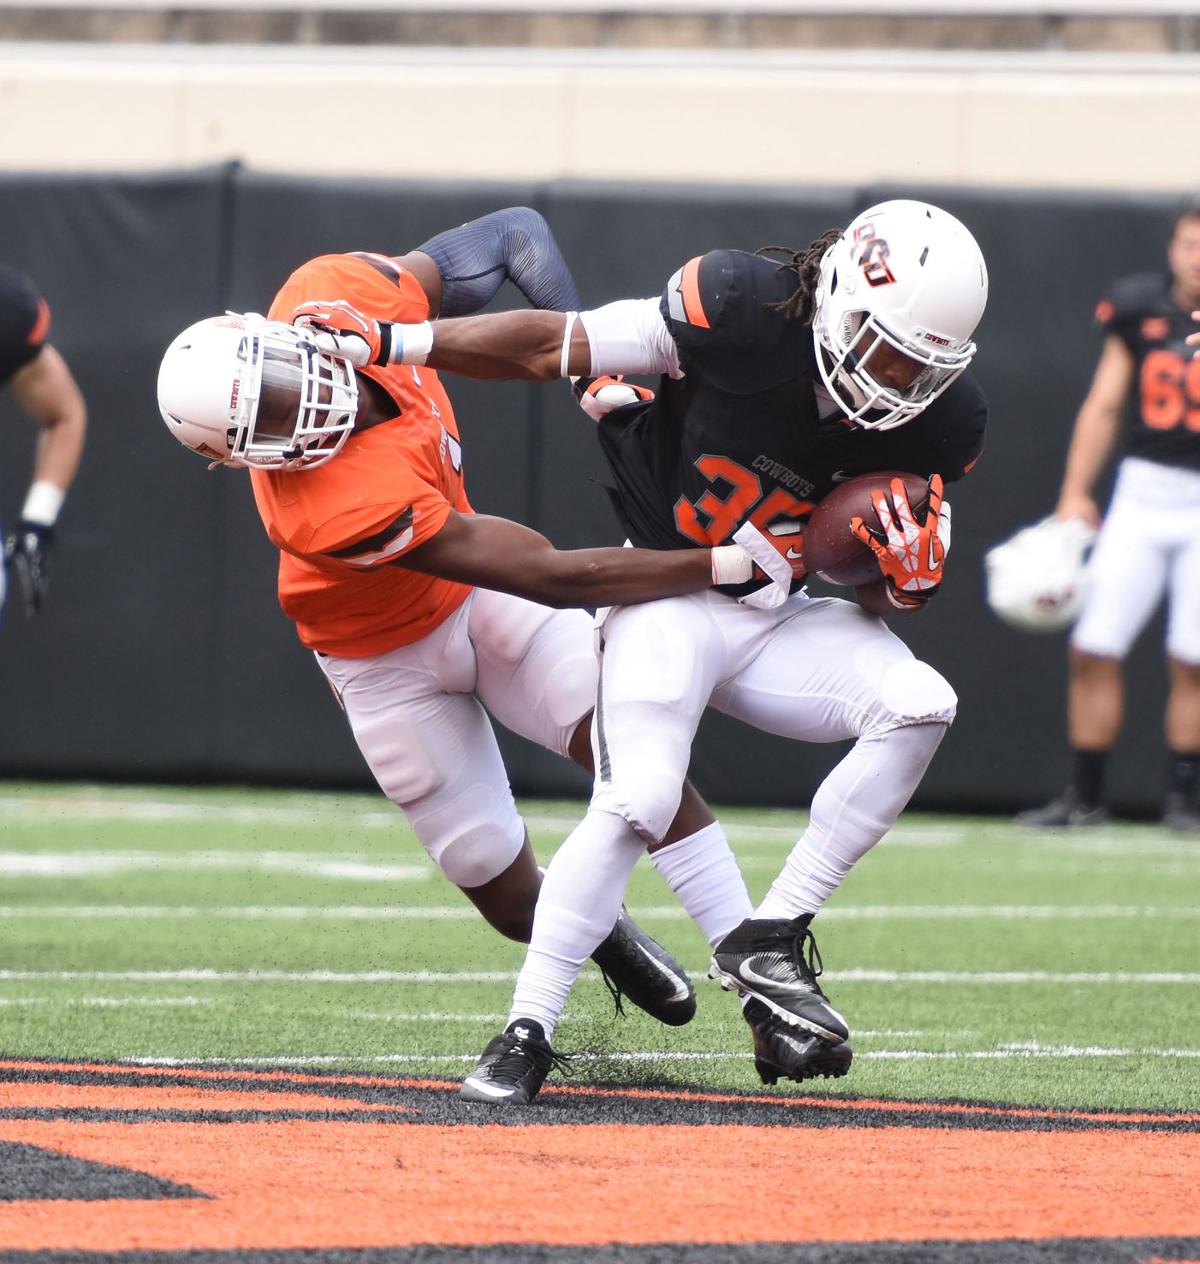 PHOTO GALLERY Oklahoma State spring football game at Boone Pickens